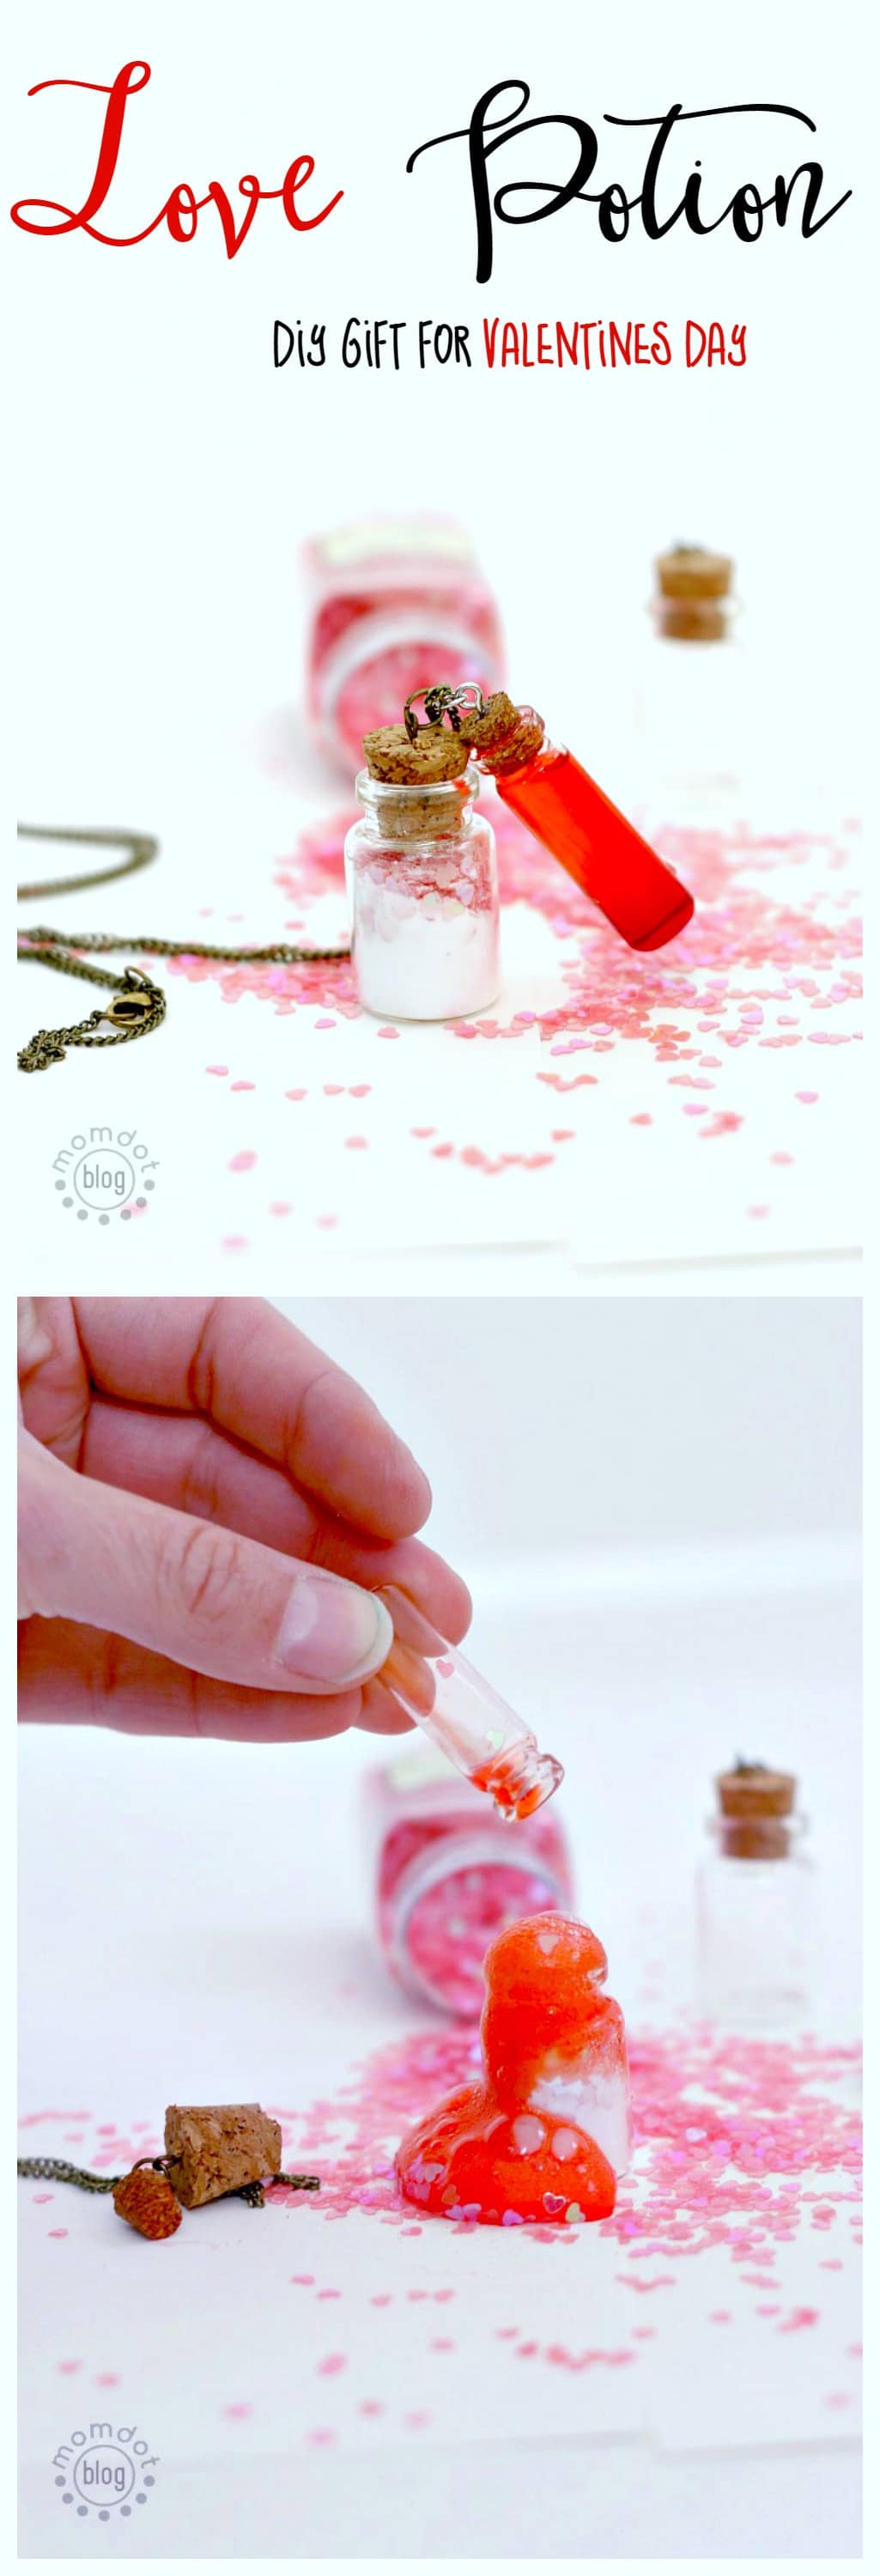 Love Potion: DIY a mini necklace set of Love Potion that really explodes with Love! Adorable, fun craft for best friend or spouse